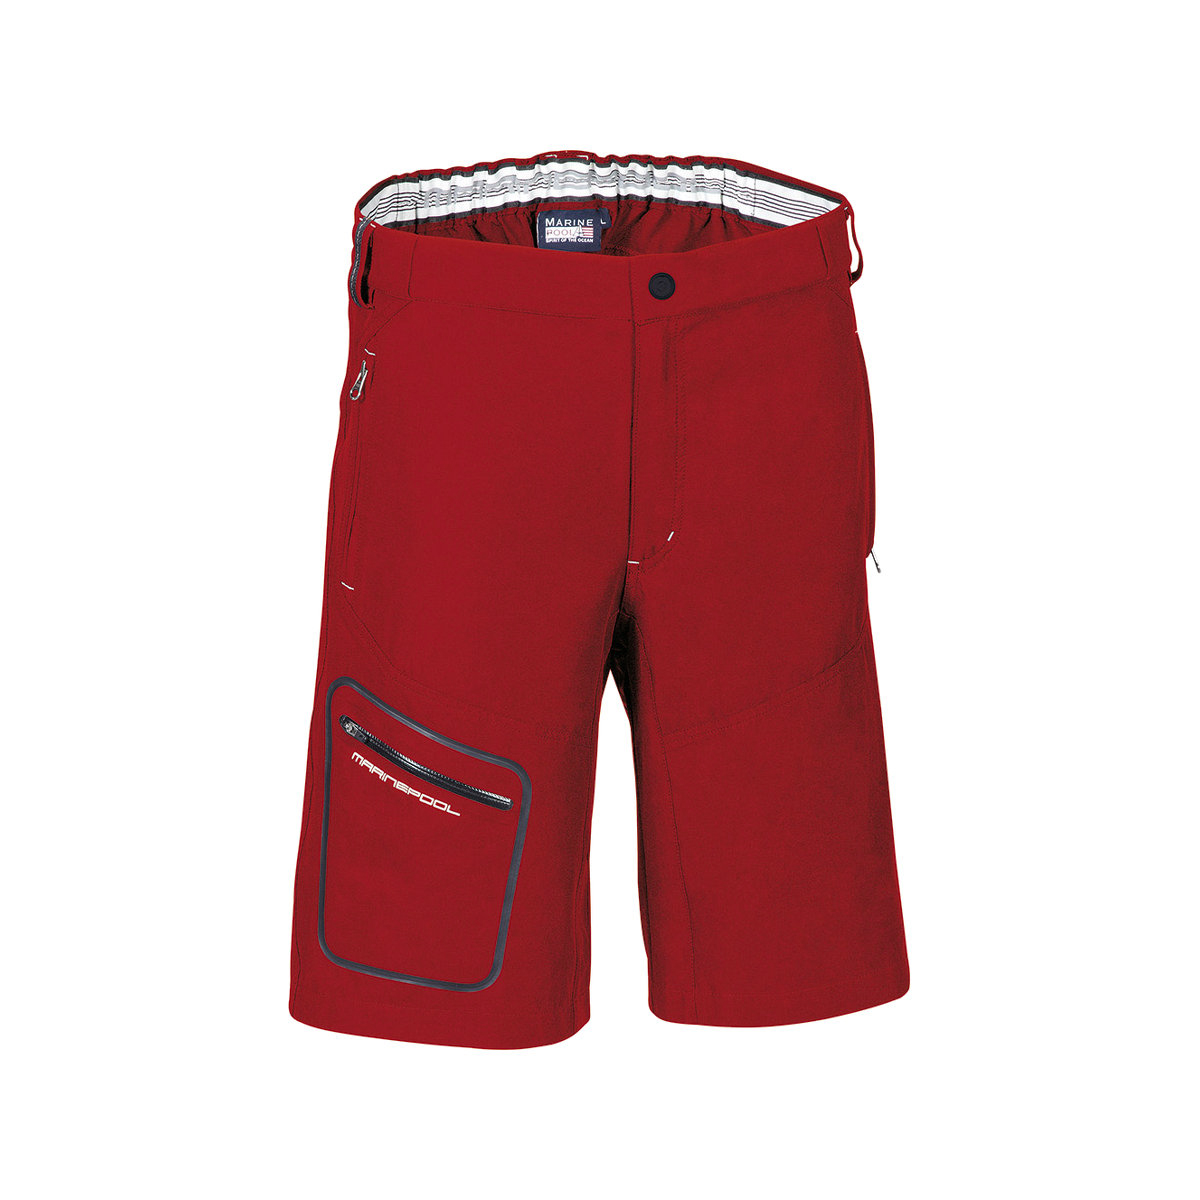 Marinepool Laser short de voile, homme - rouge, taille S